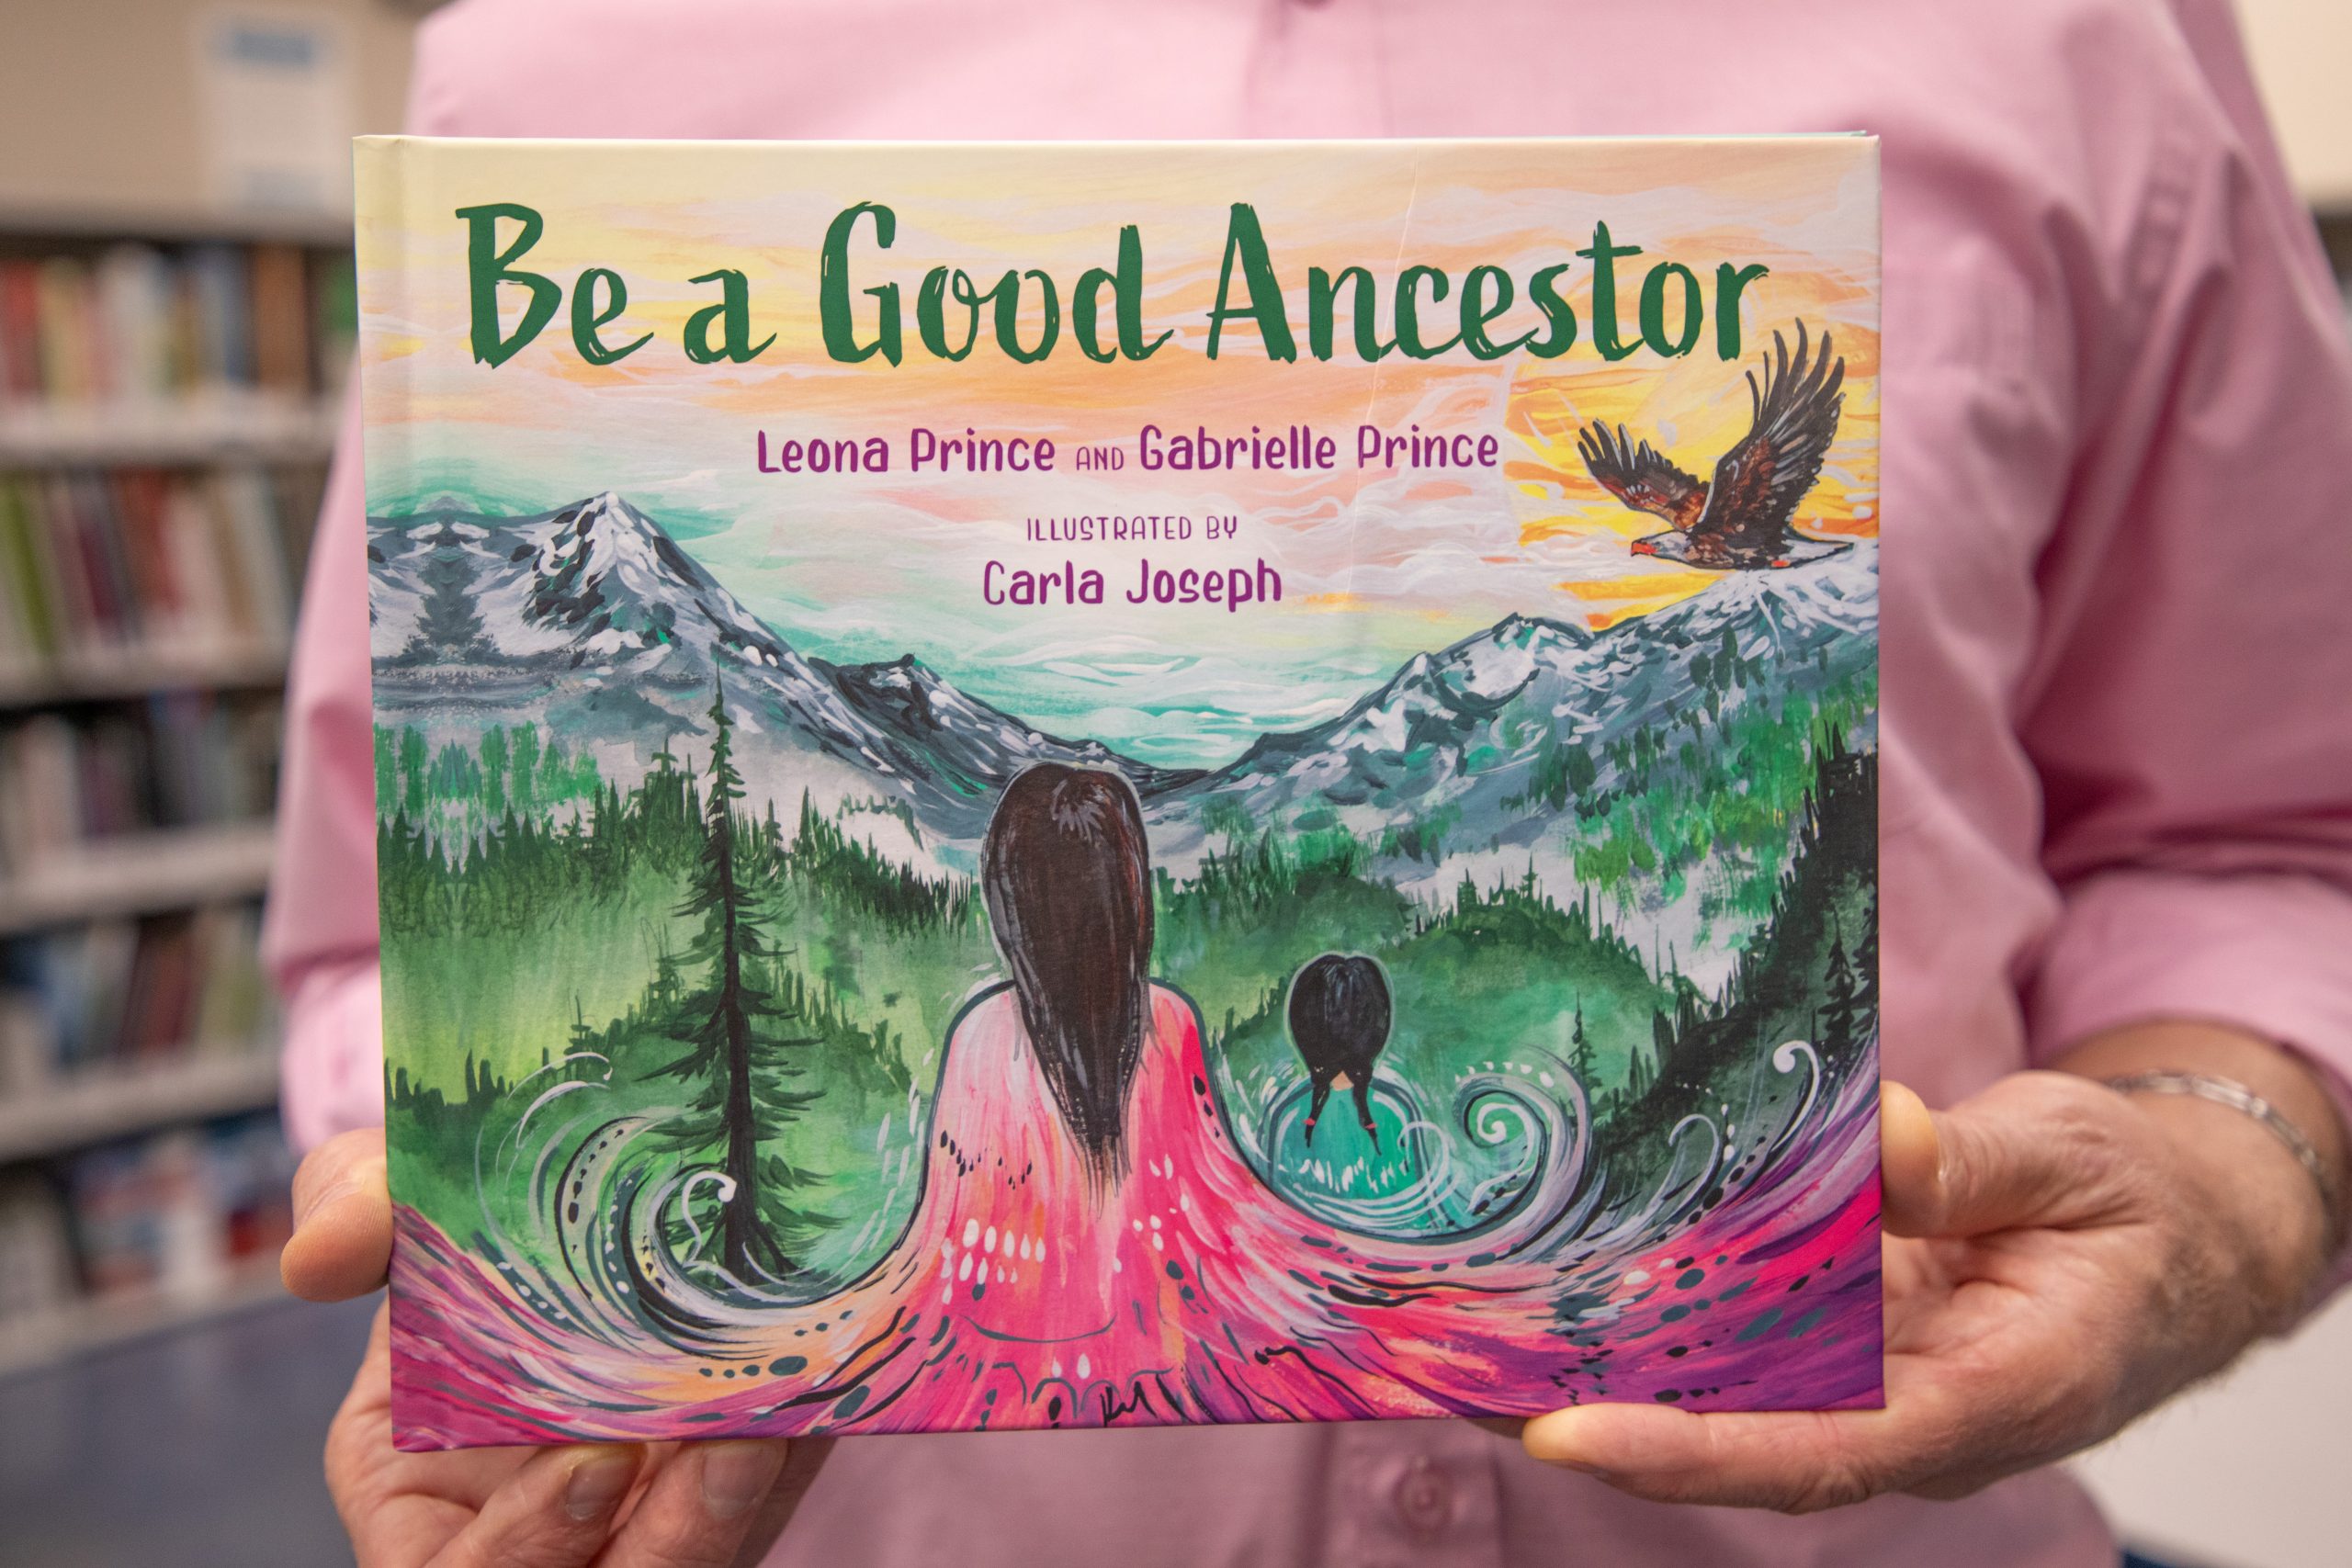 "Be a Good Ancestor" by Leona Prince and Gabrielle Prince.